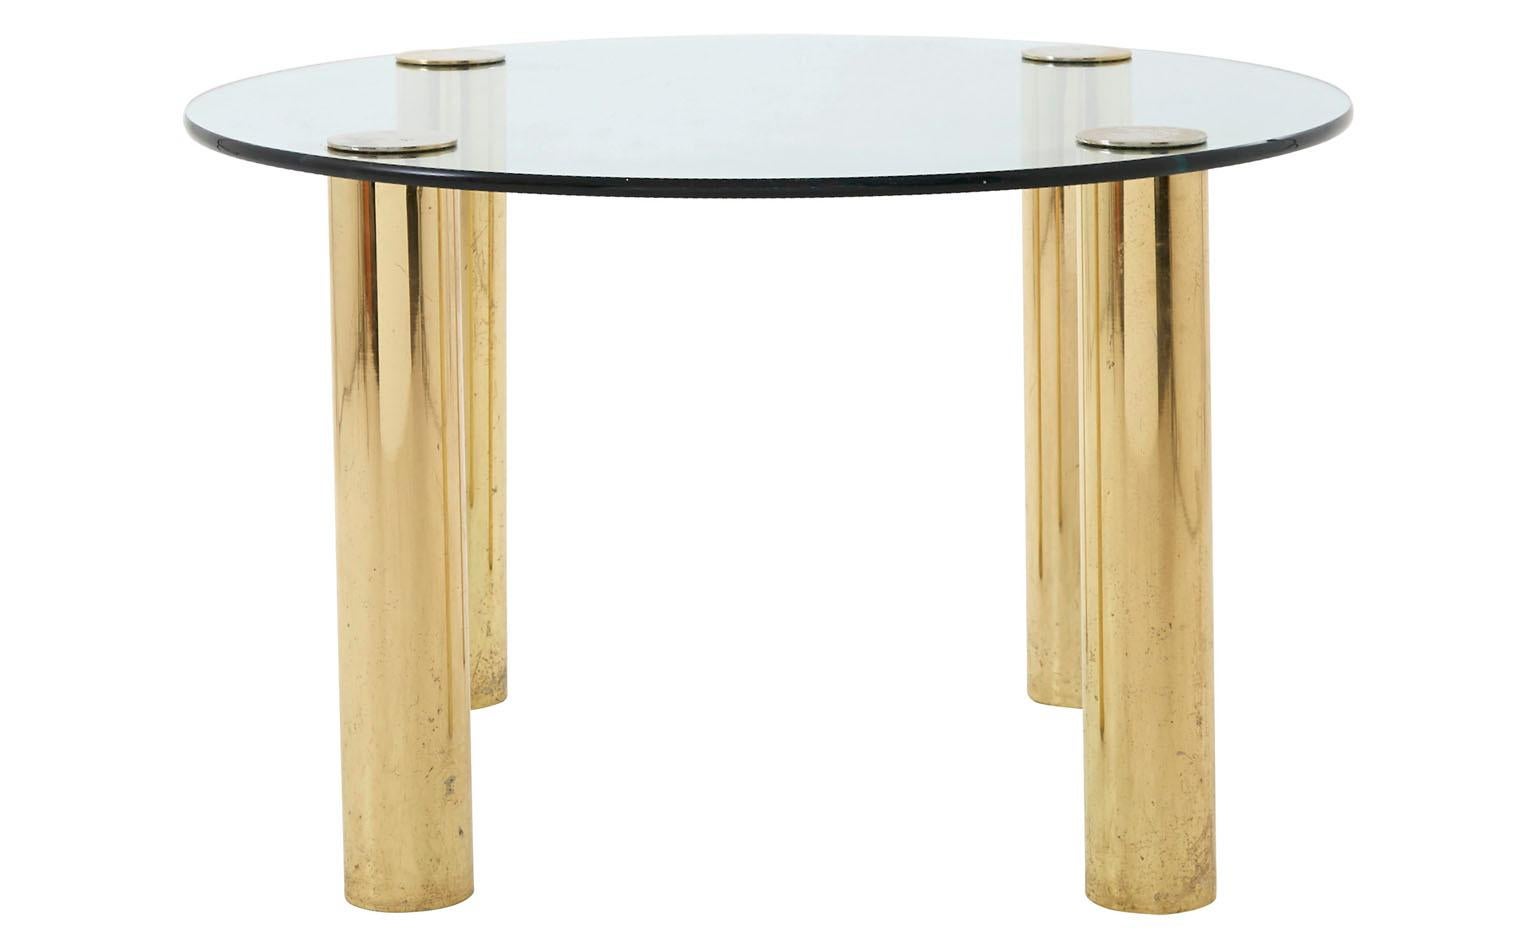 Our Hollywood Regency-style Vintage Brass Dining Table was made in America in the 20th century. It features its original round glass top, supported by four cylindrical, shiny brass legs. It is in good condition, with some scratches and wear